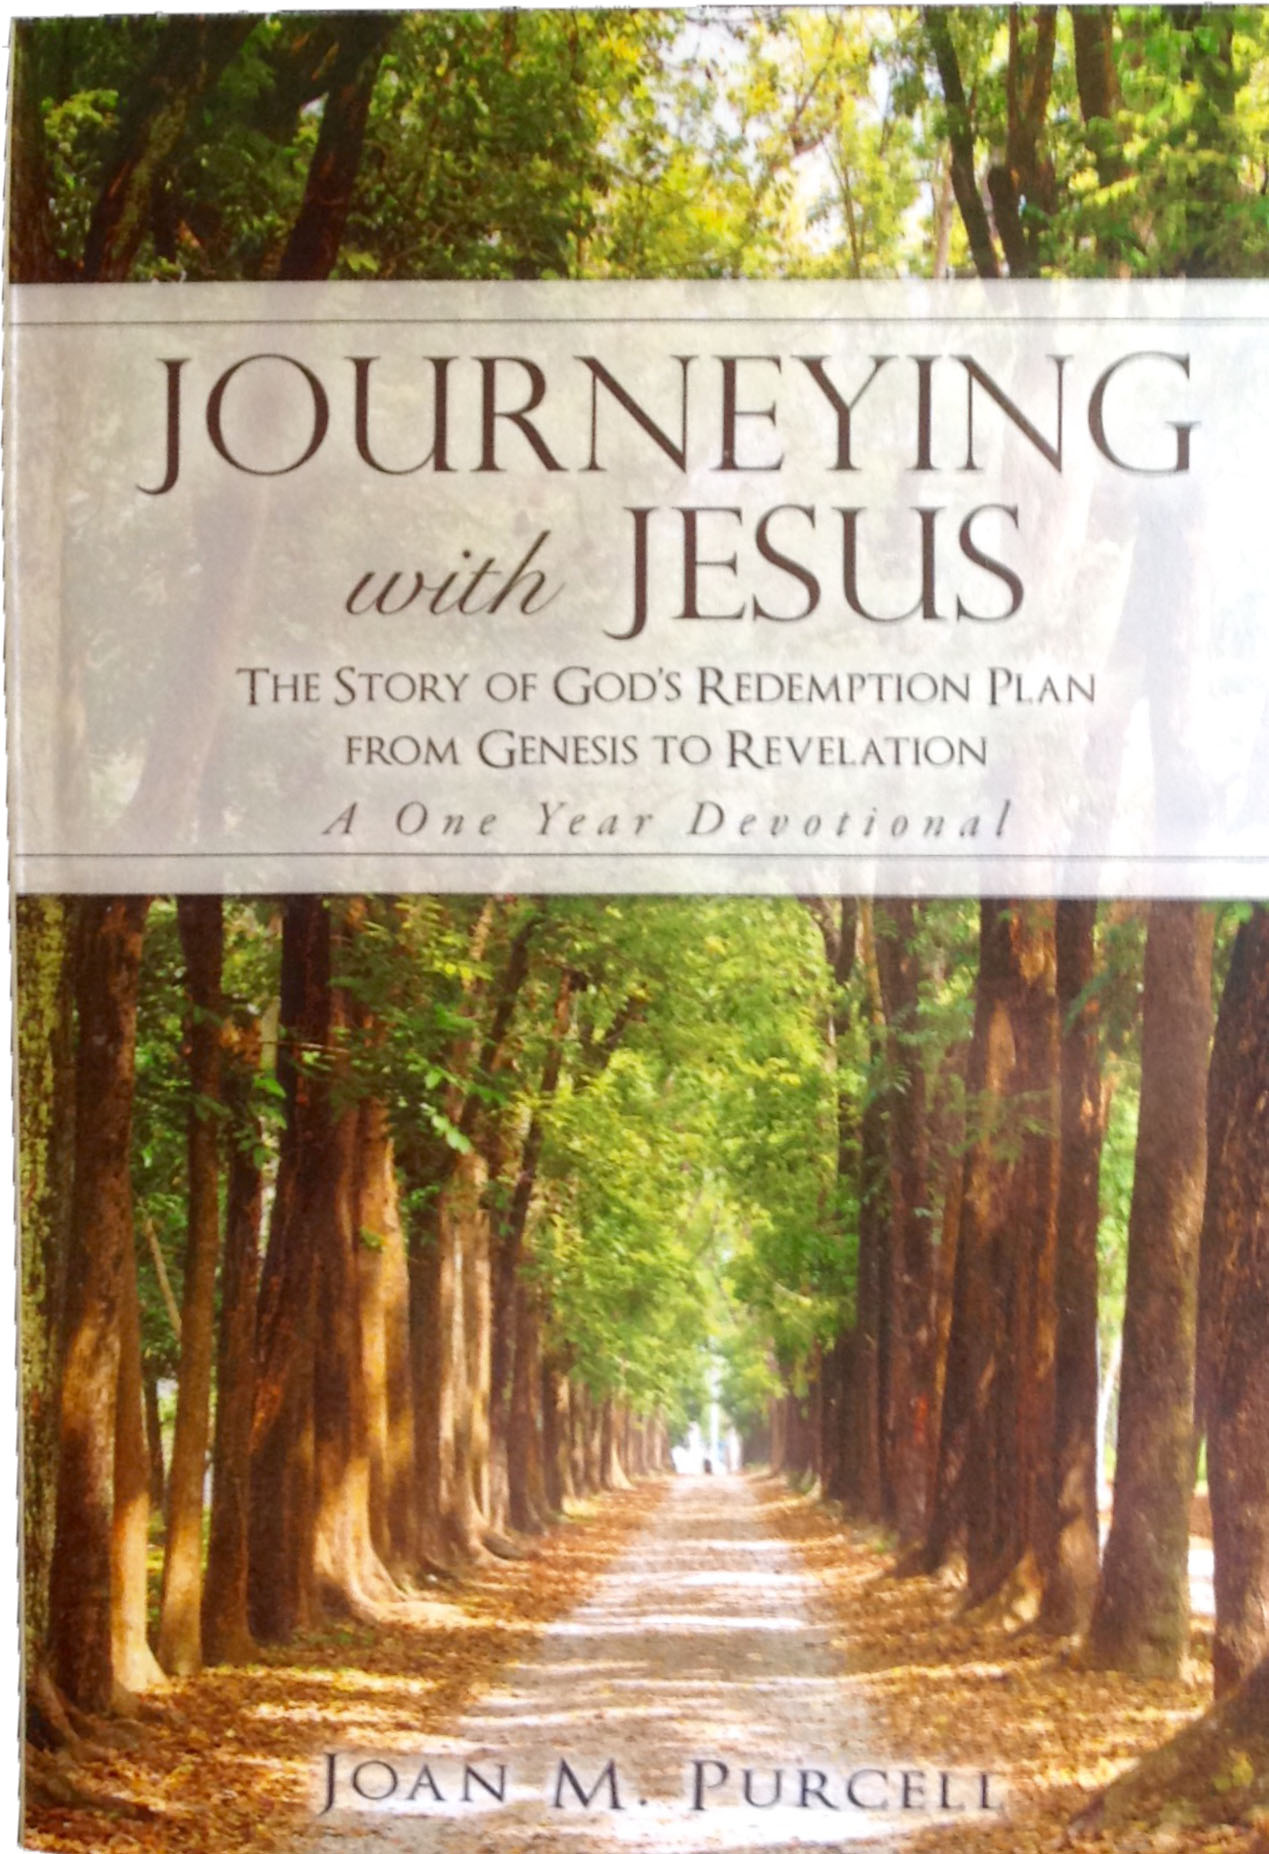 JourneyingwithJesus